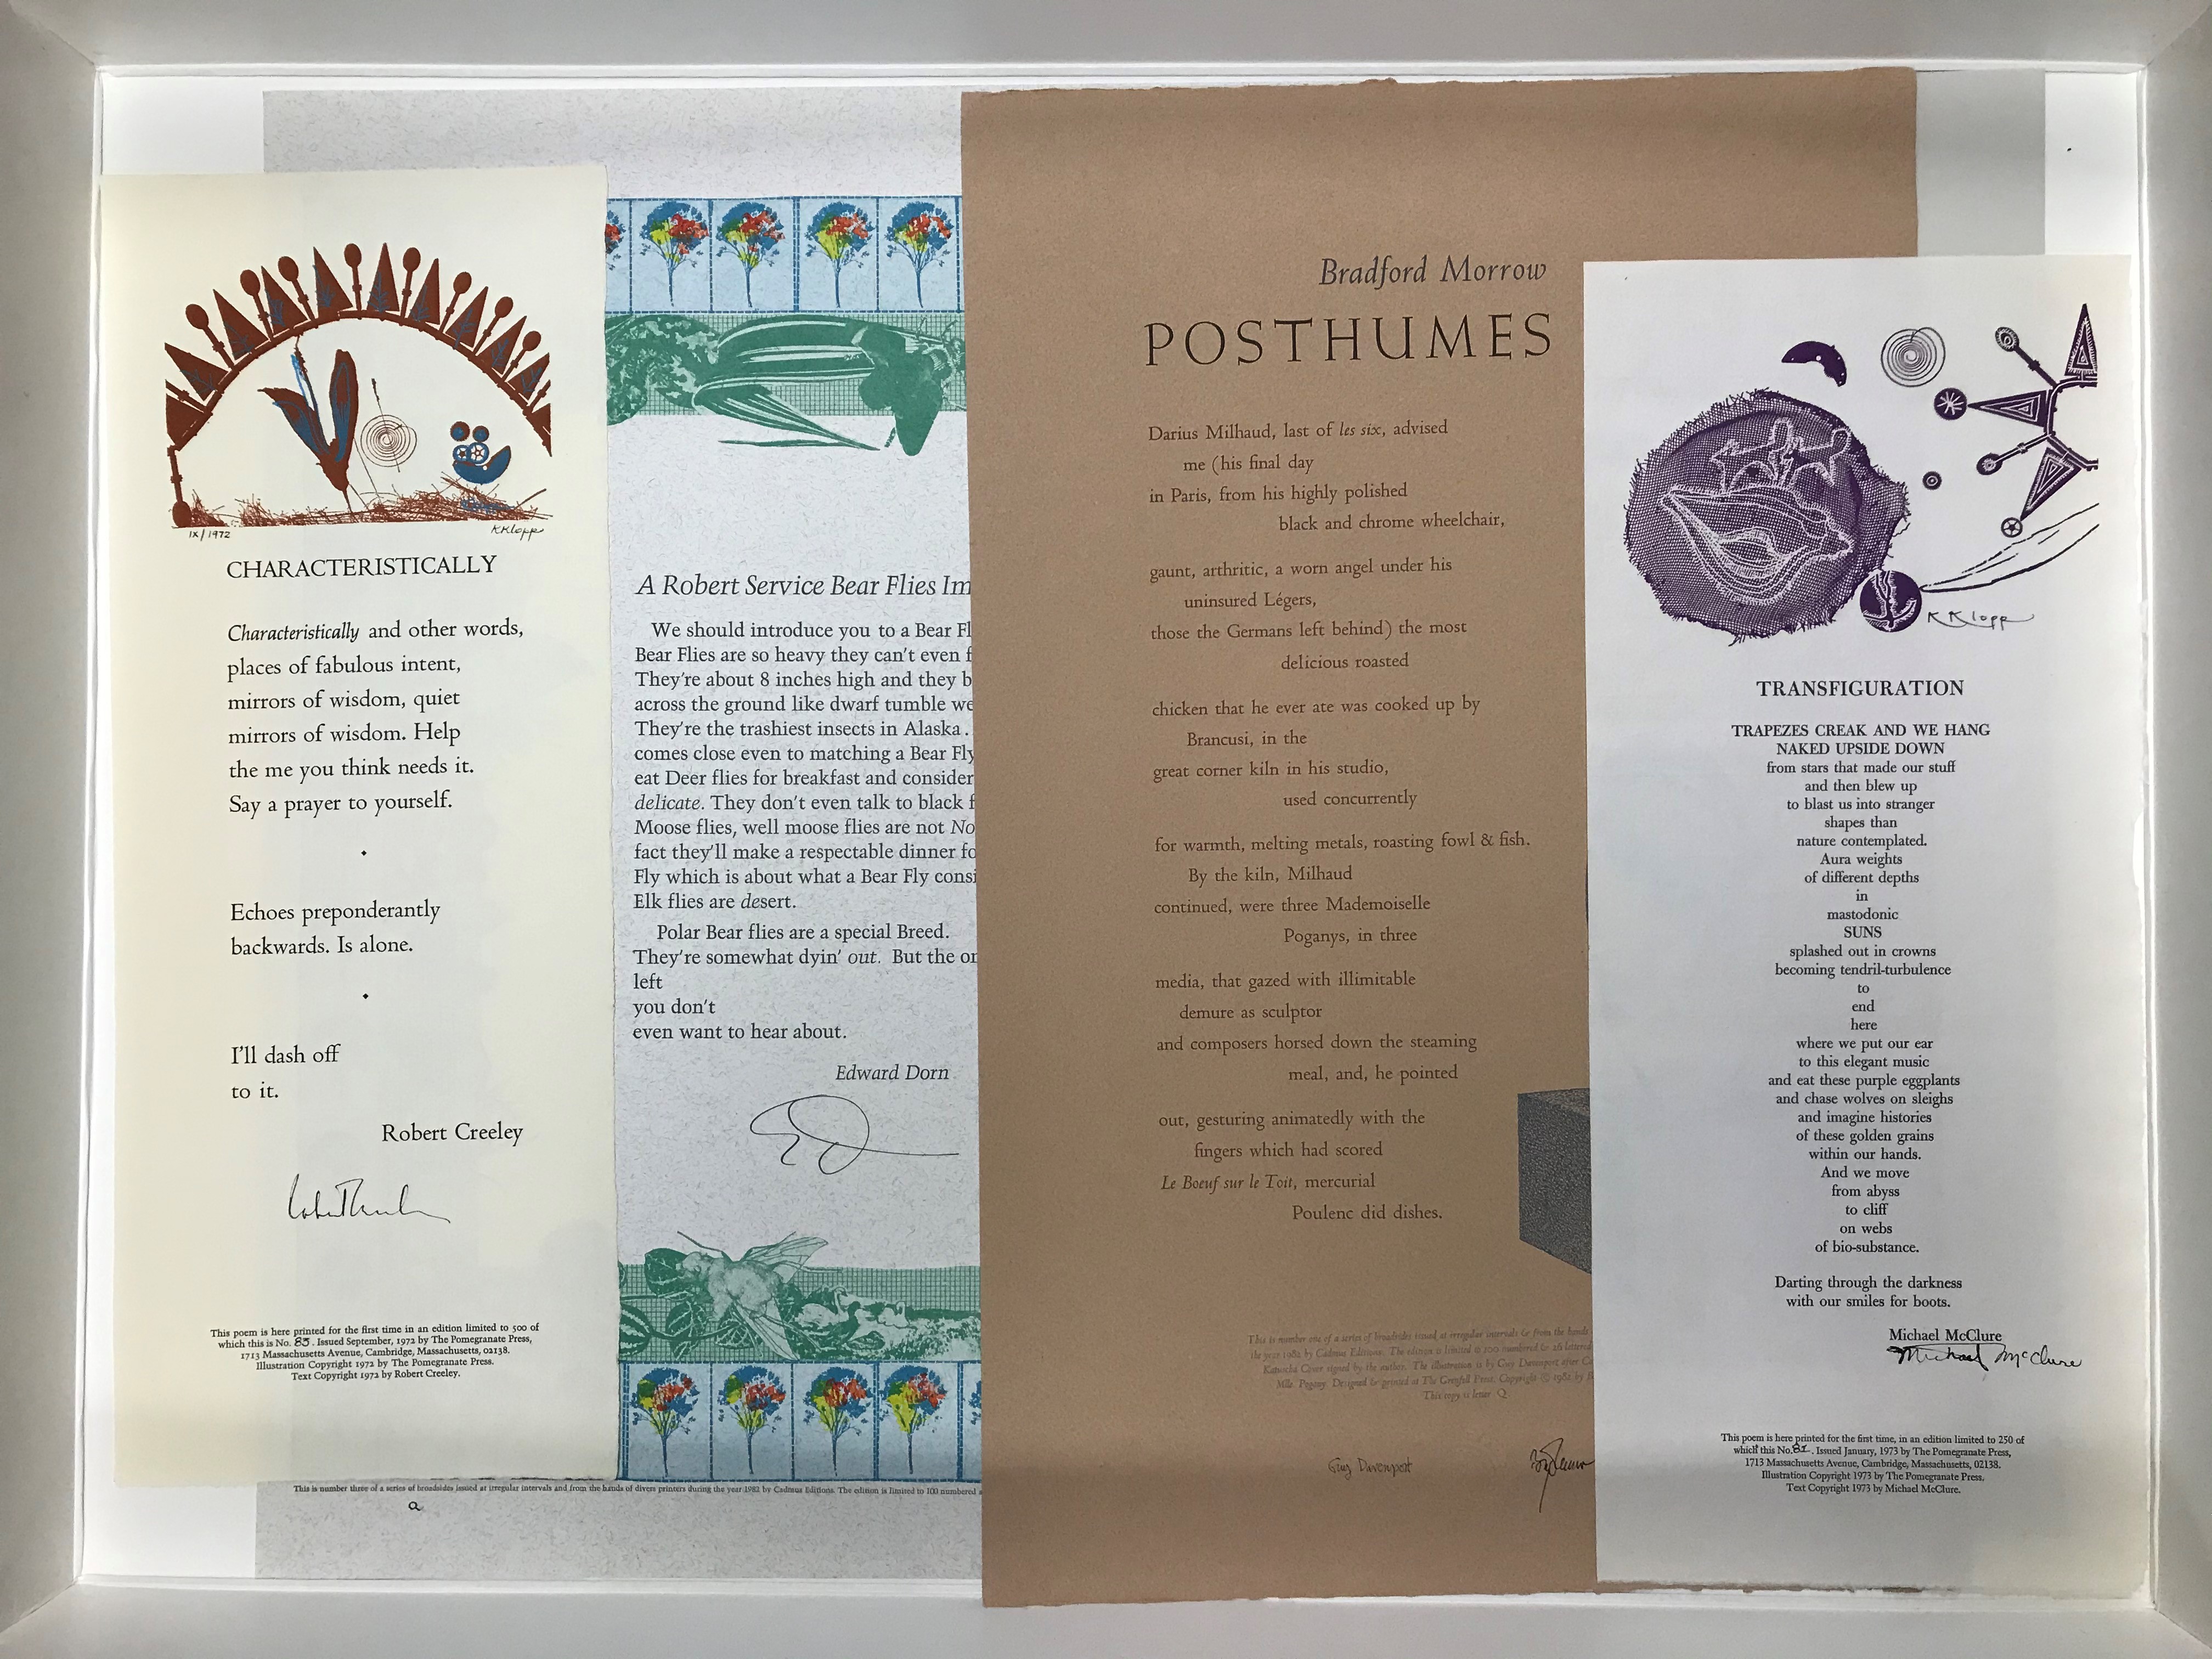 A collage of broadsides from the collection.